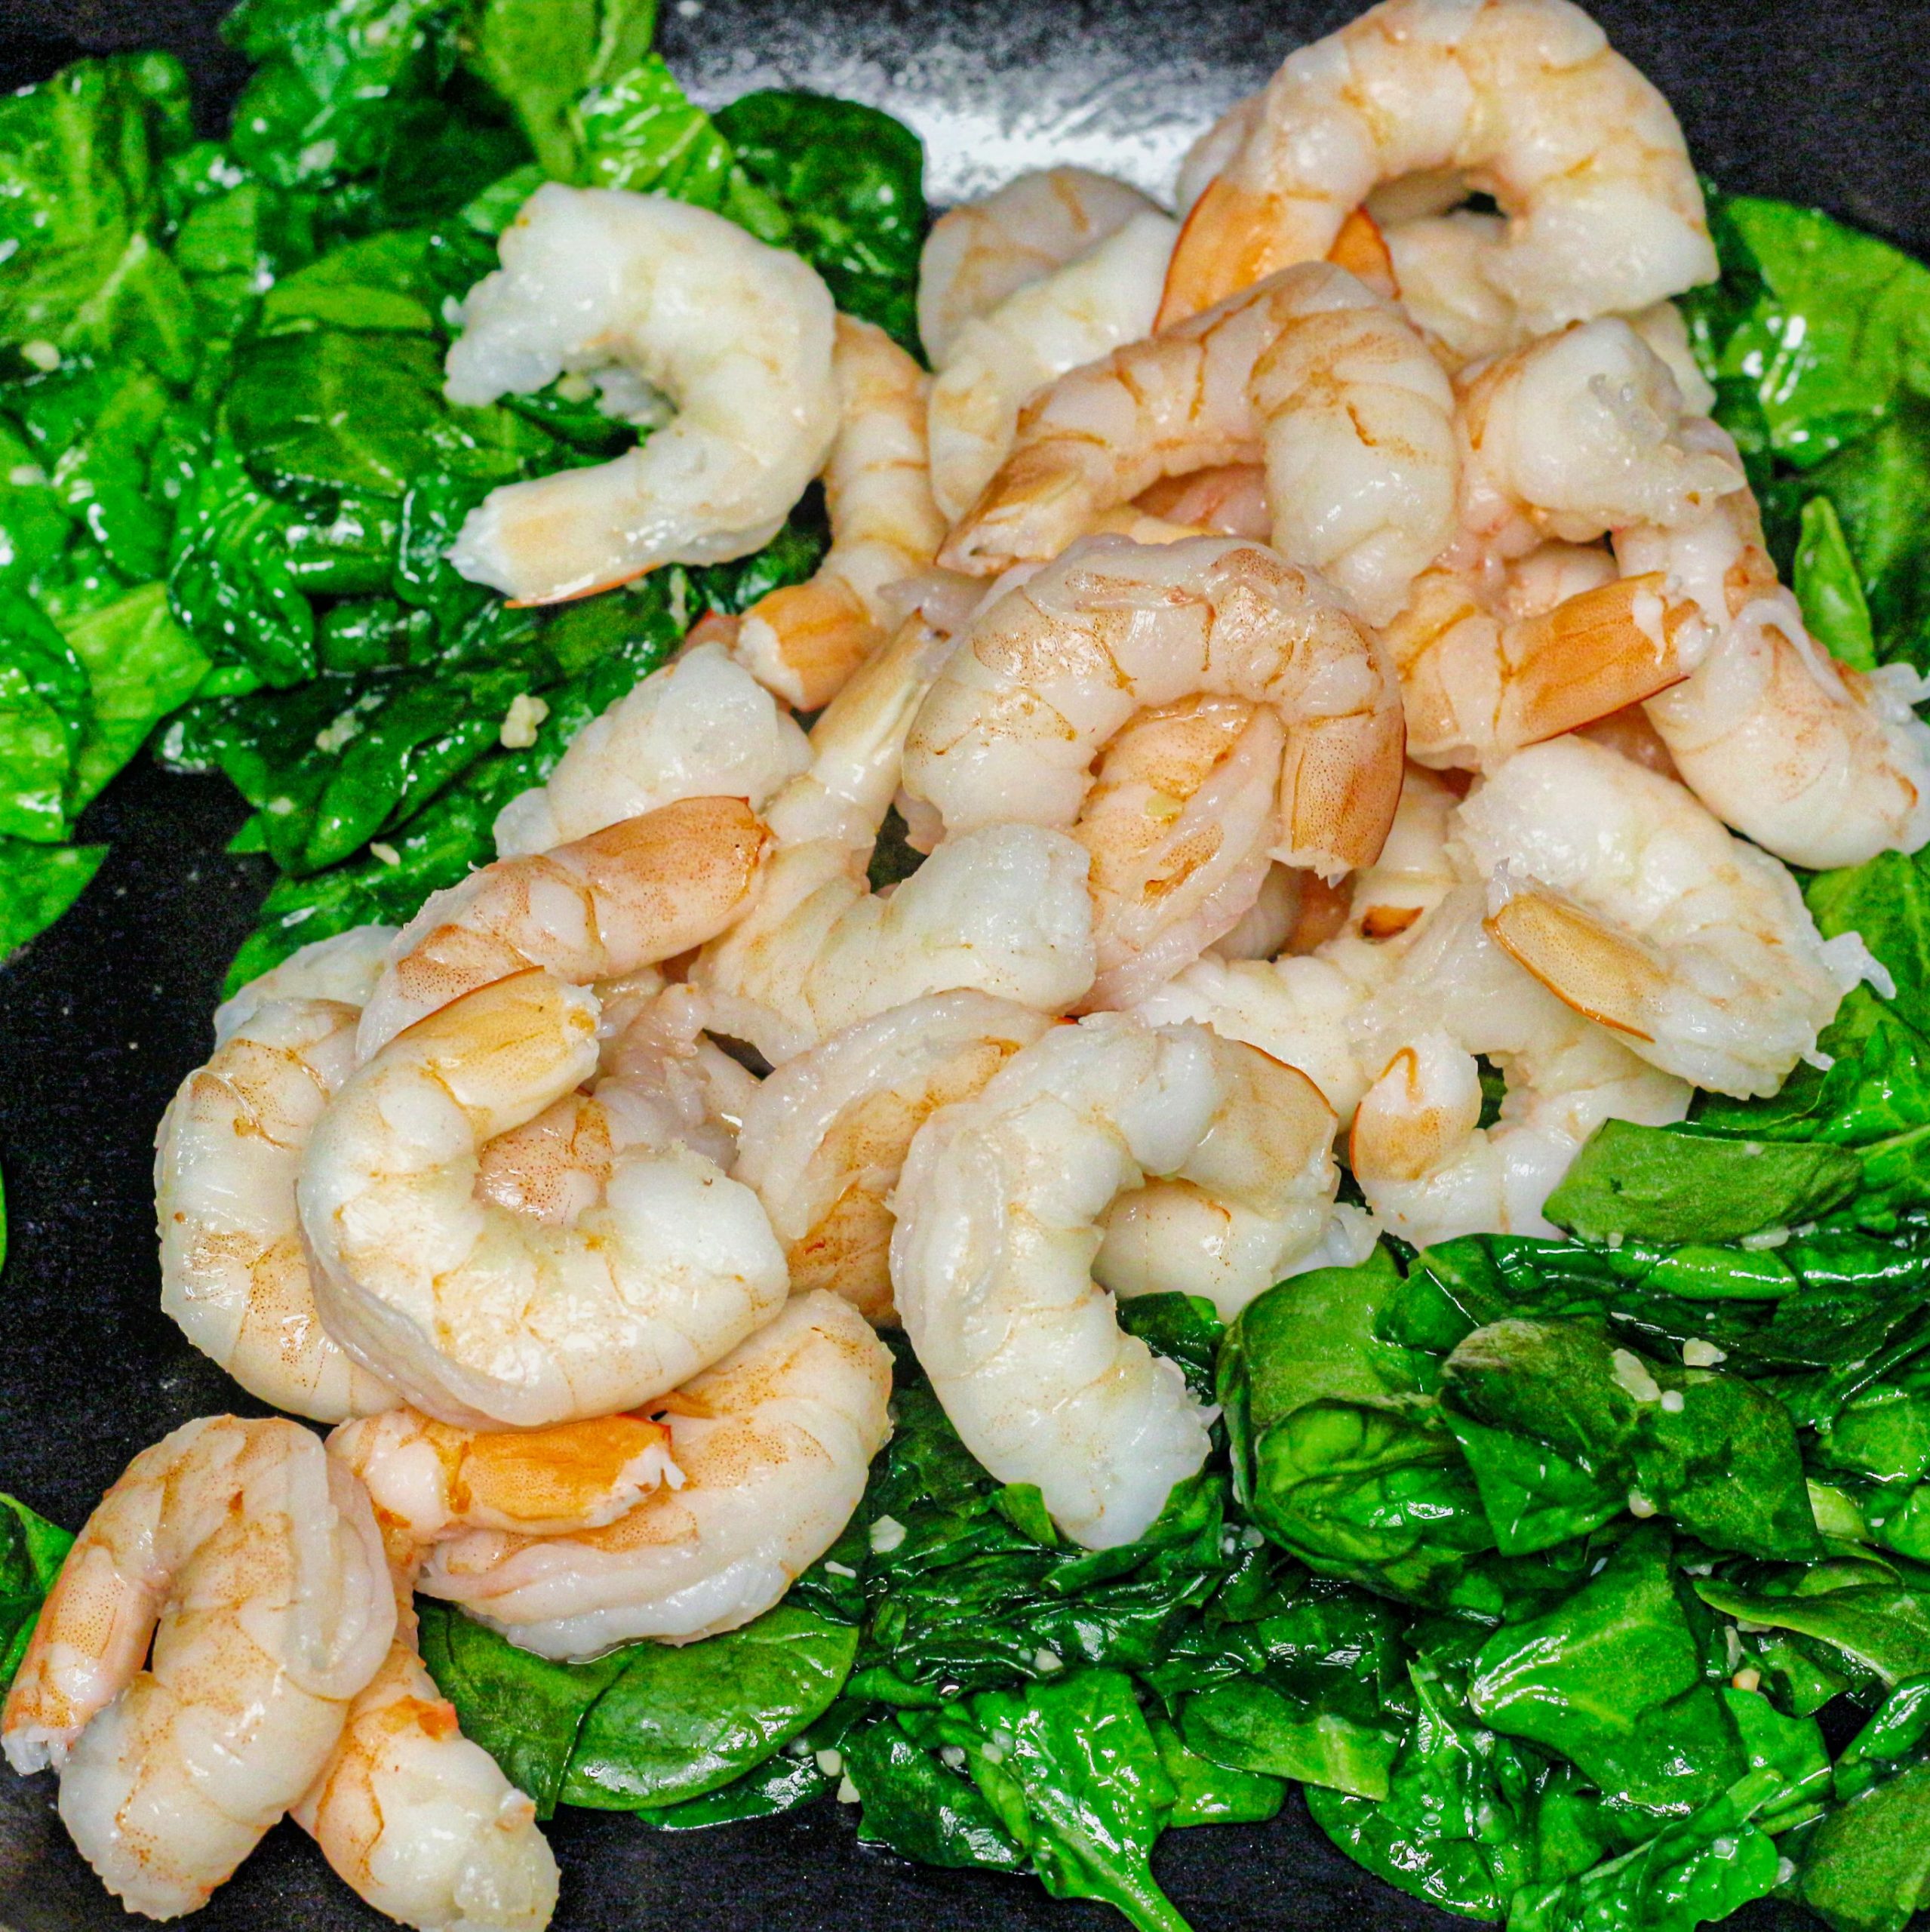 Add the cooked shrimp to the spinach and toss to combine.